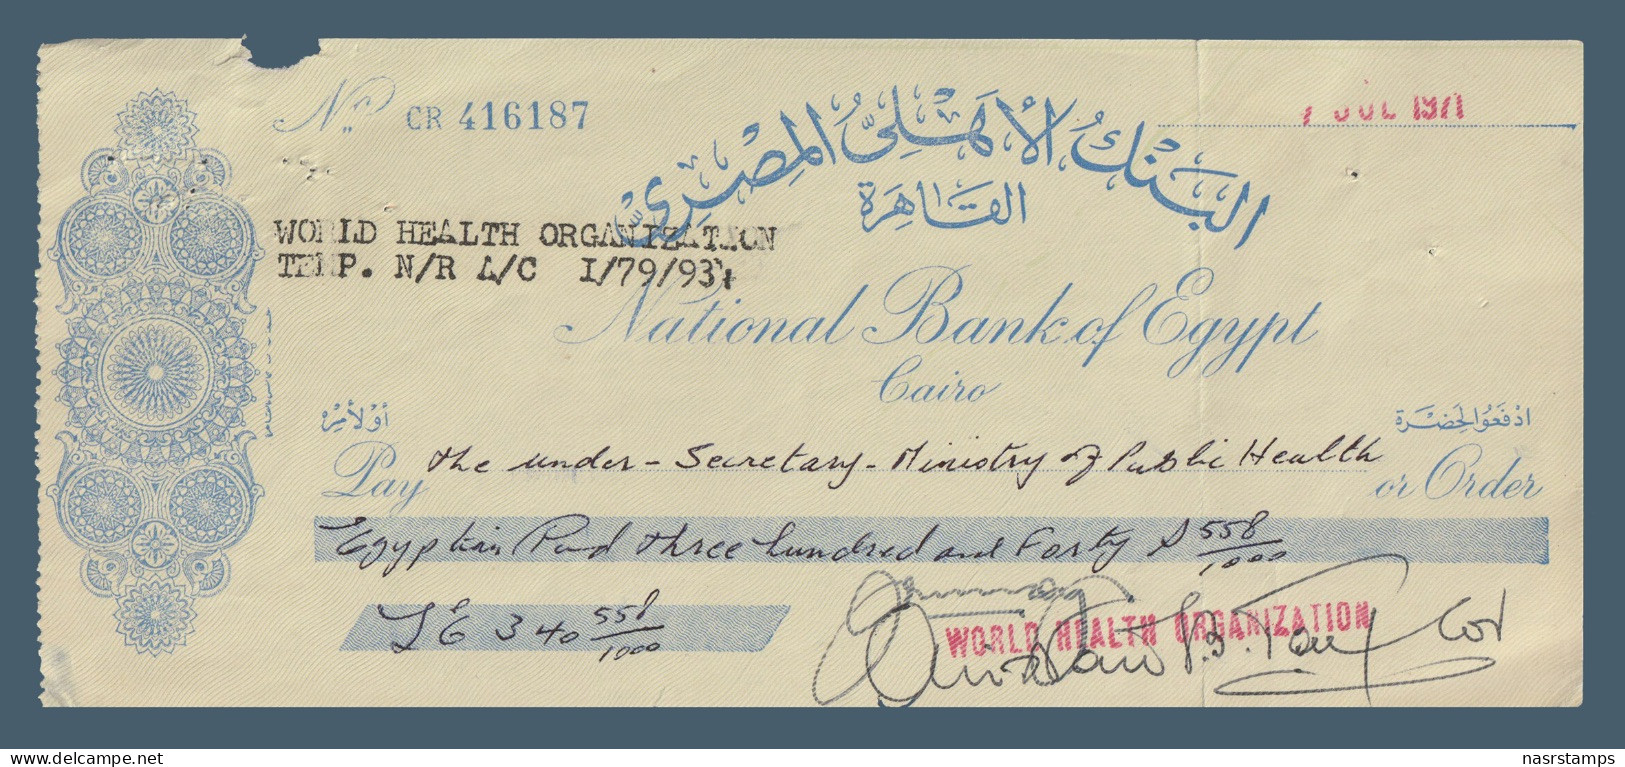 Egypt - 1971 - Vintage Check - ( National Bank Of Egypt ) - Cheques & Traverler's Cheques